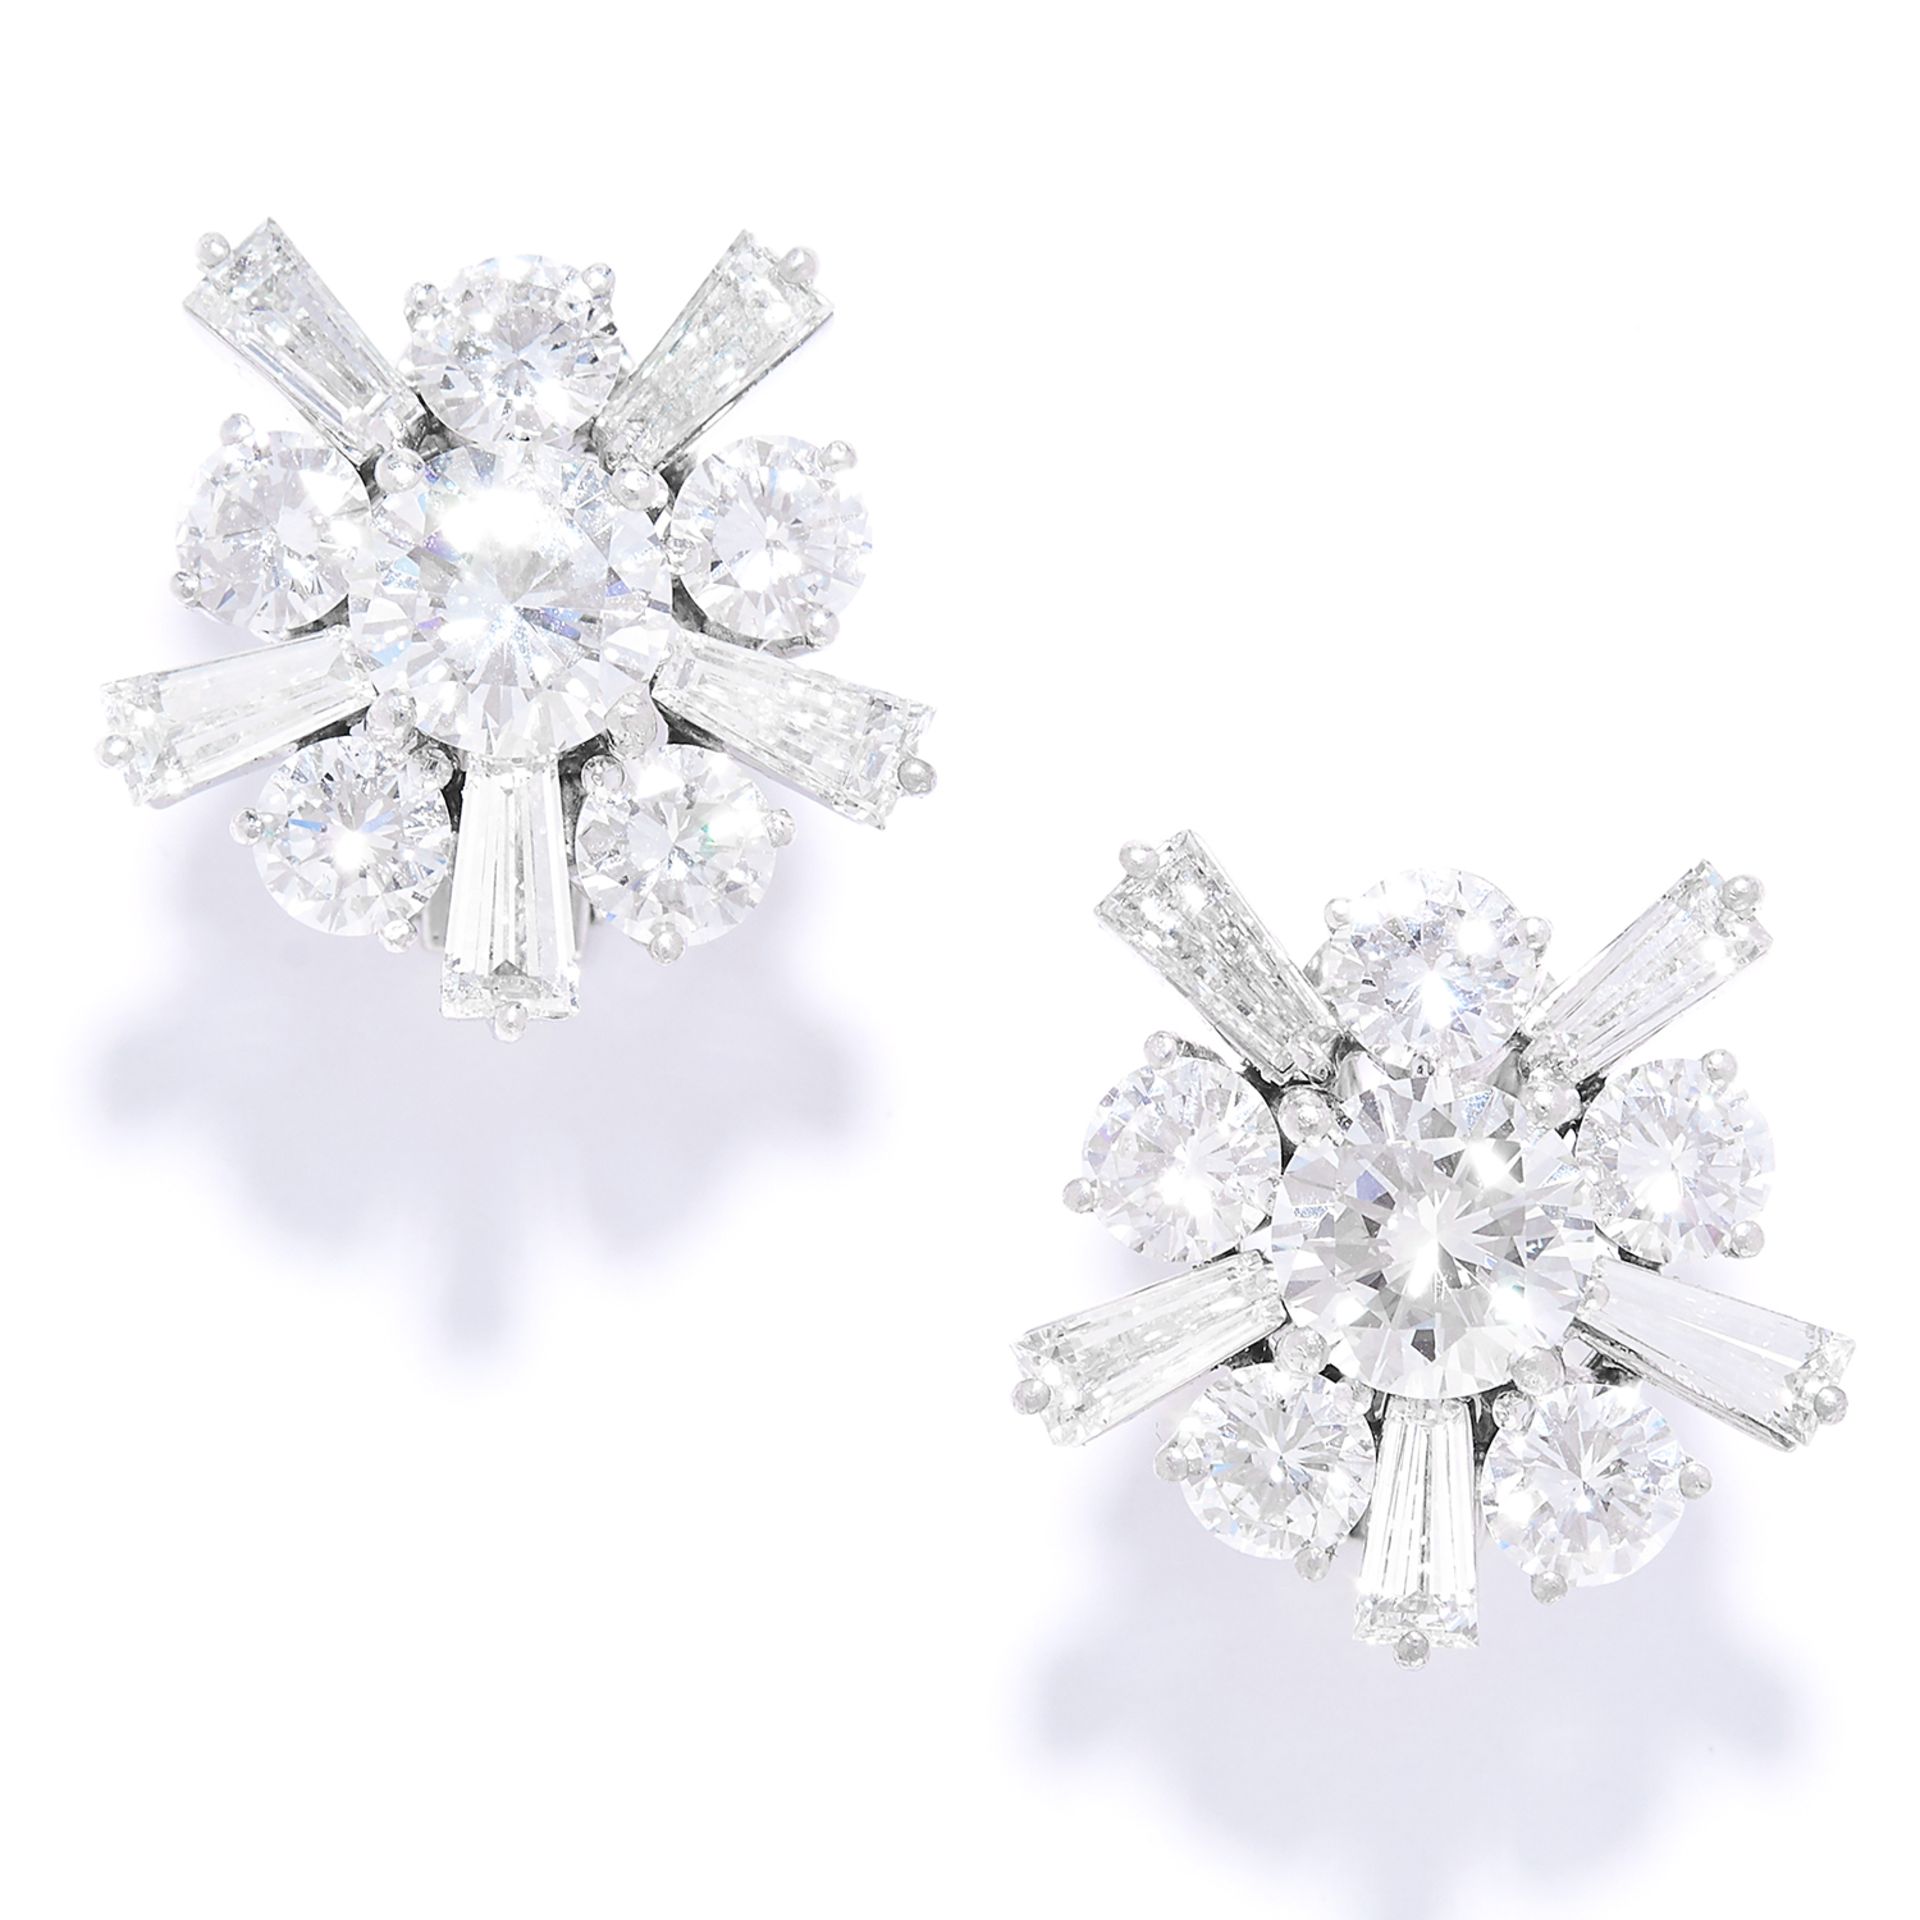 7.77 CARAT DIAMOND EARRINGS, KUTCHINSKY in 18ct white gold, set with round and baguette cut diamonds